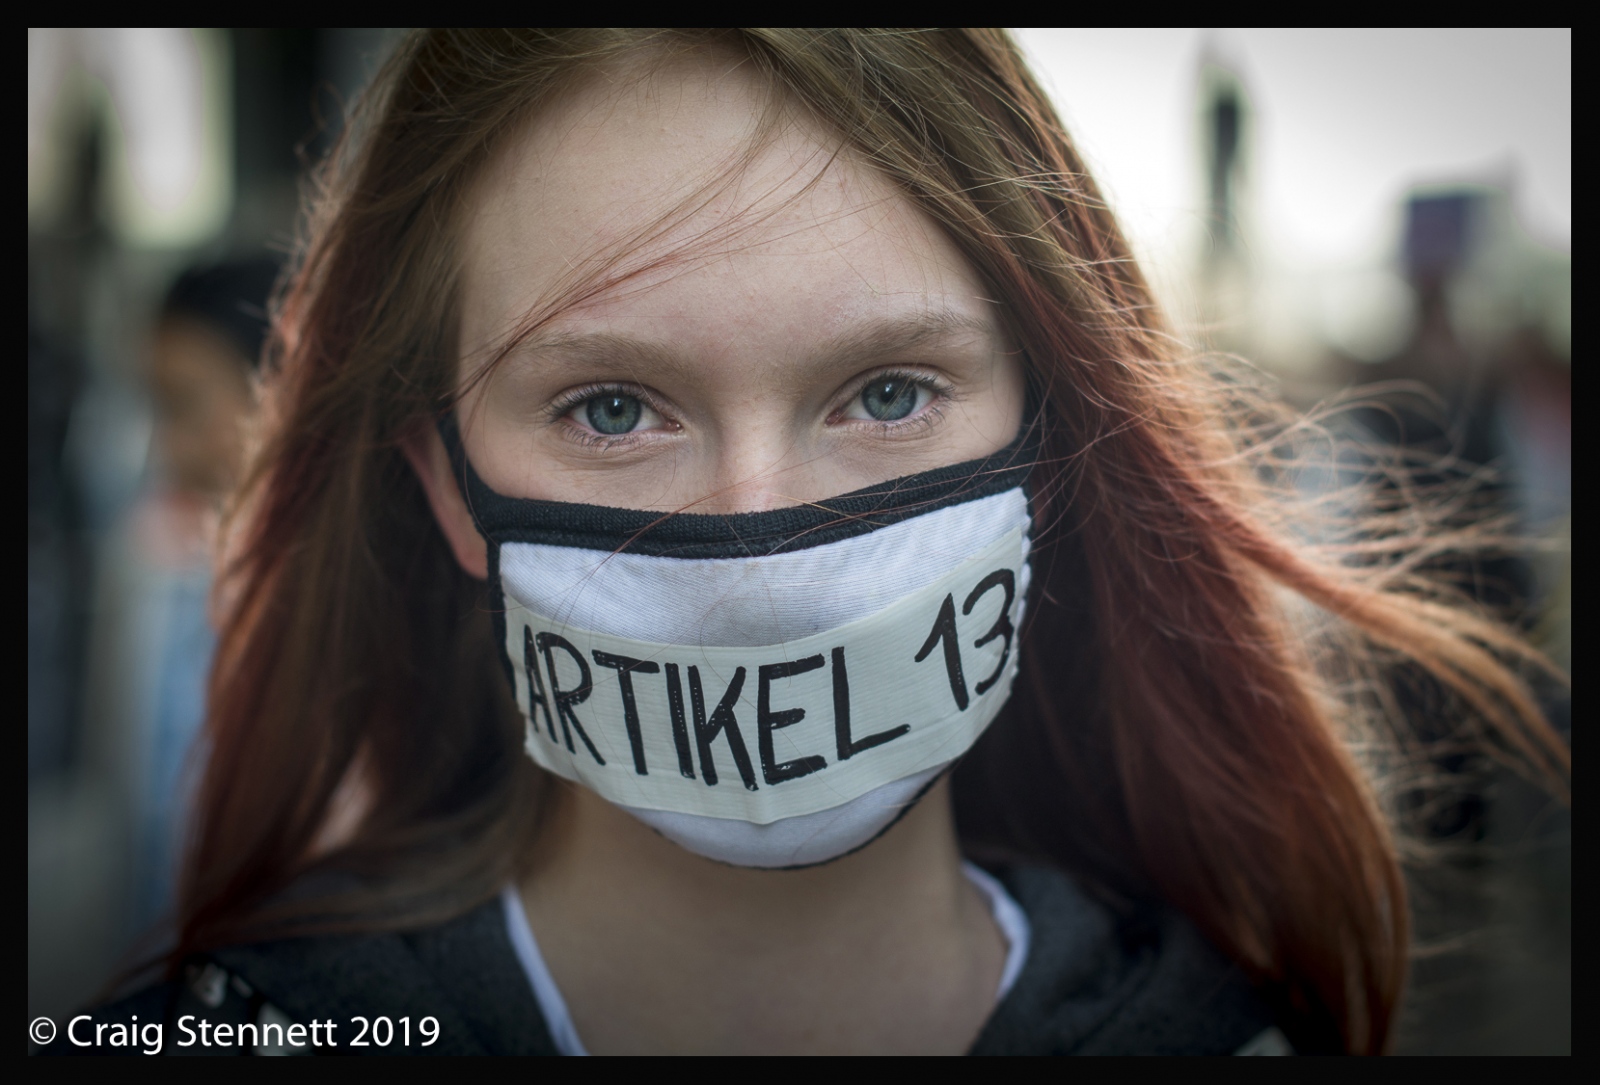 Article 13 Protest, Leipzig, Germany.